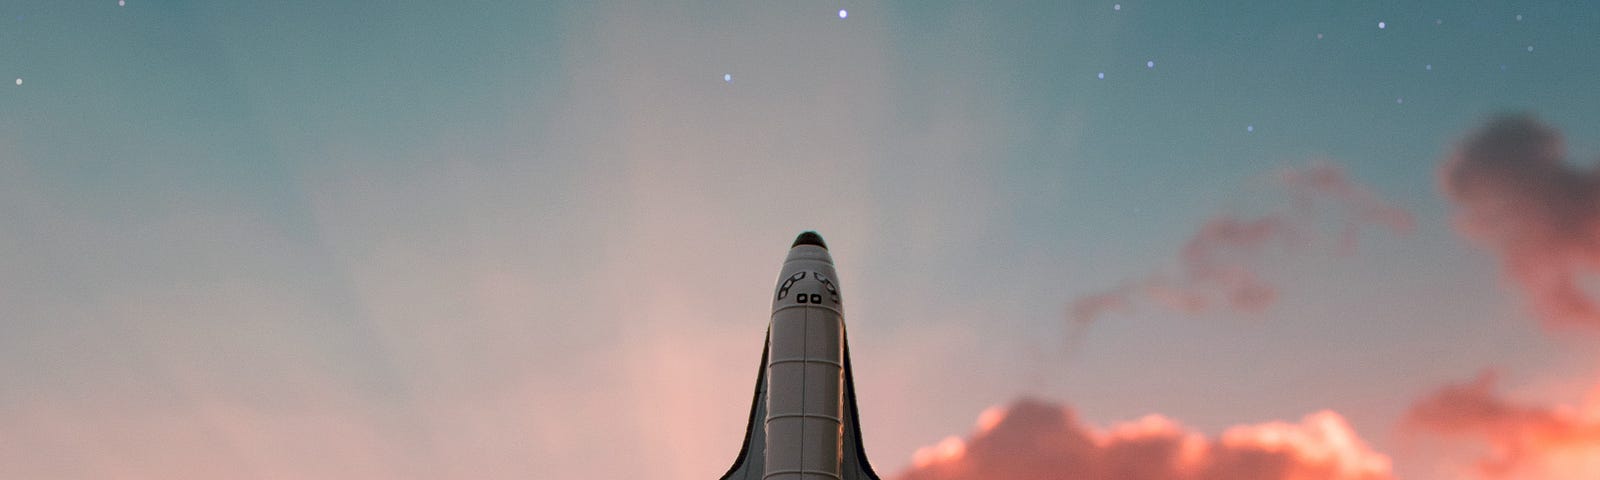 A space shuttle taking off against a pink sky